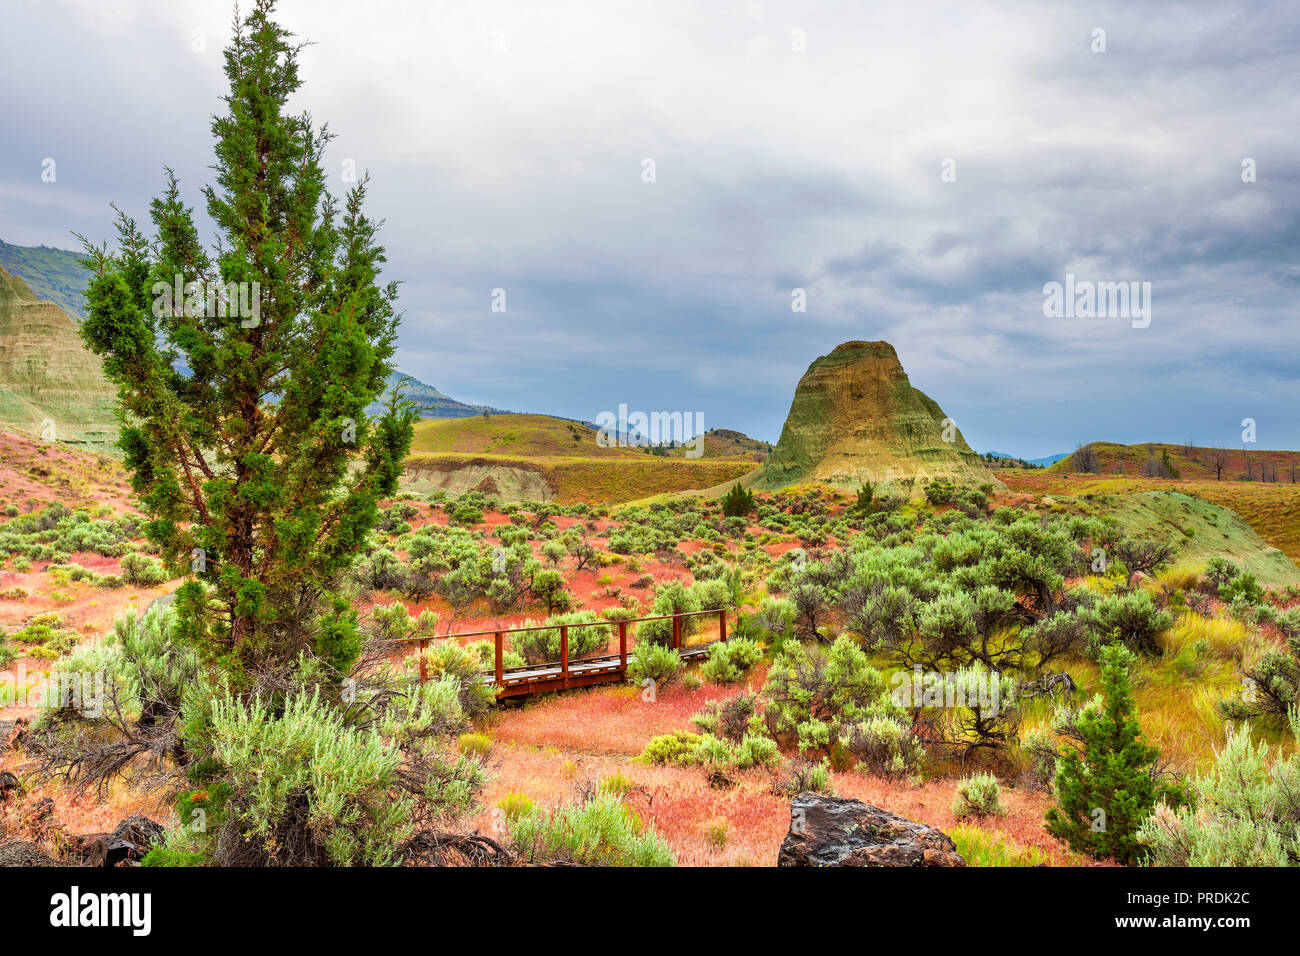 High desert landscape full of geological features in the John Day Fossil Beds National Park Stock Photo